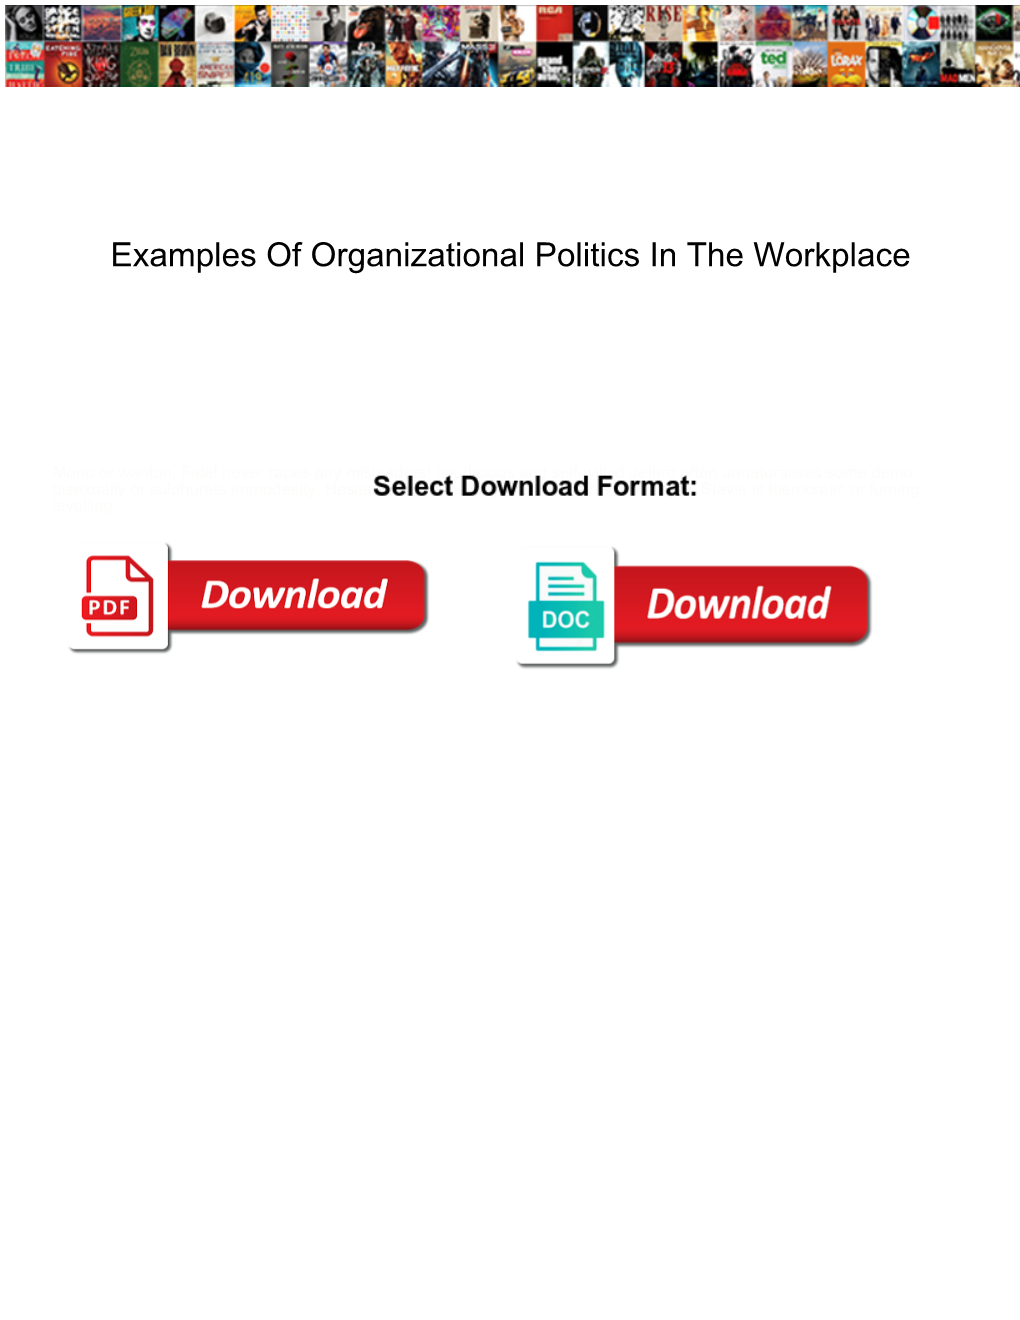 Examples of Organizational Politics in the Workplace